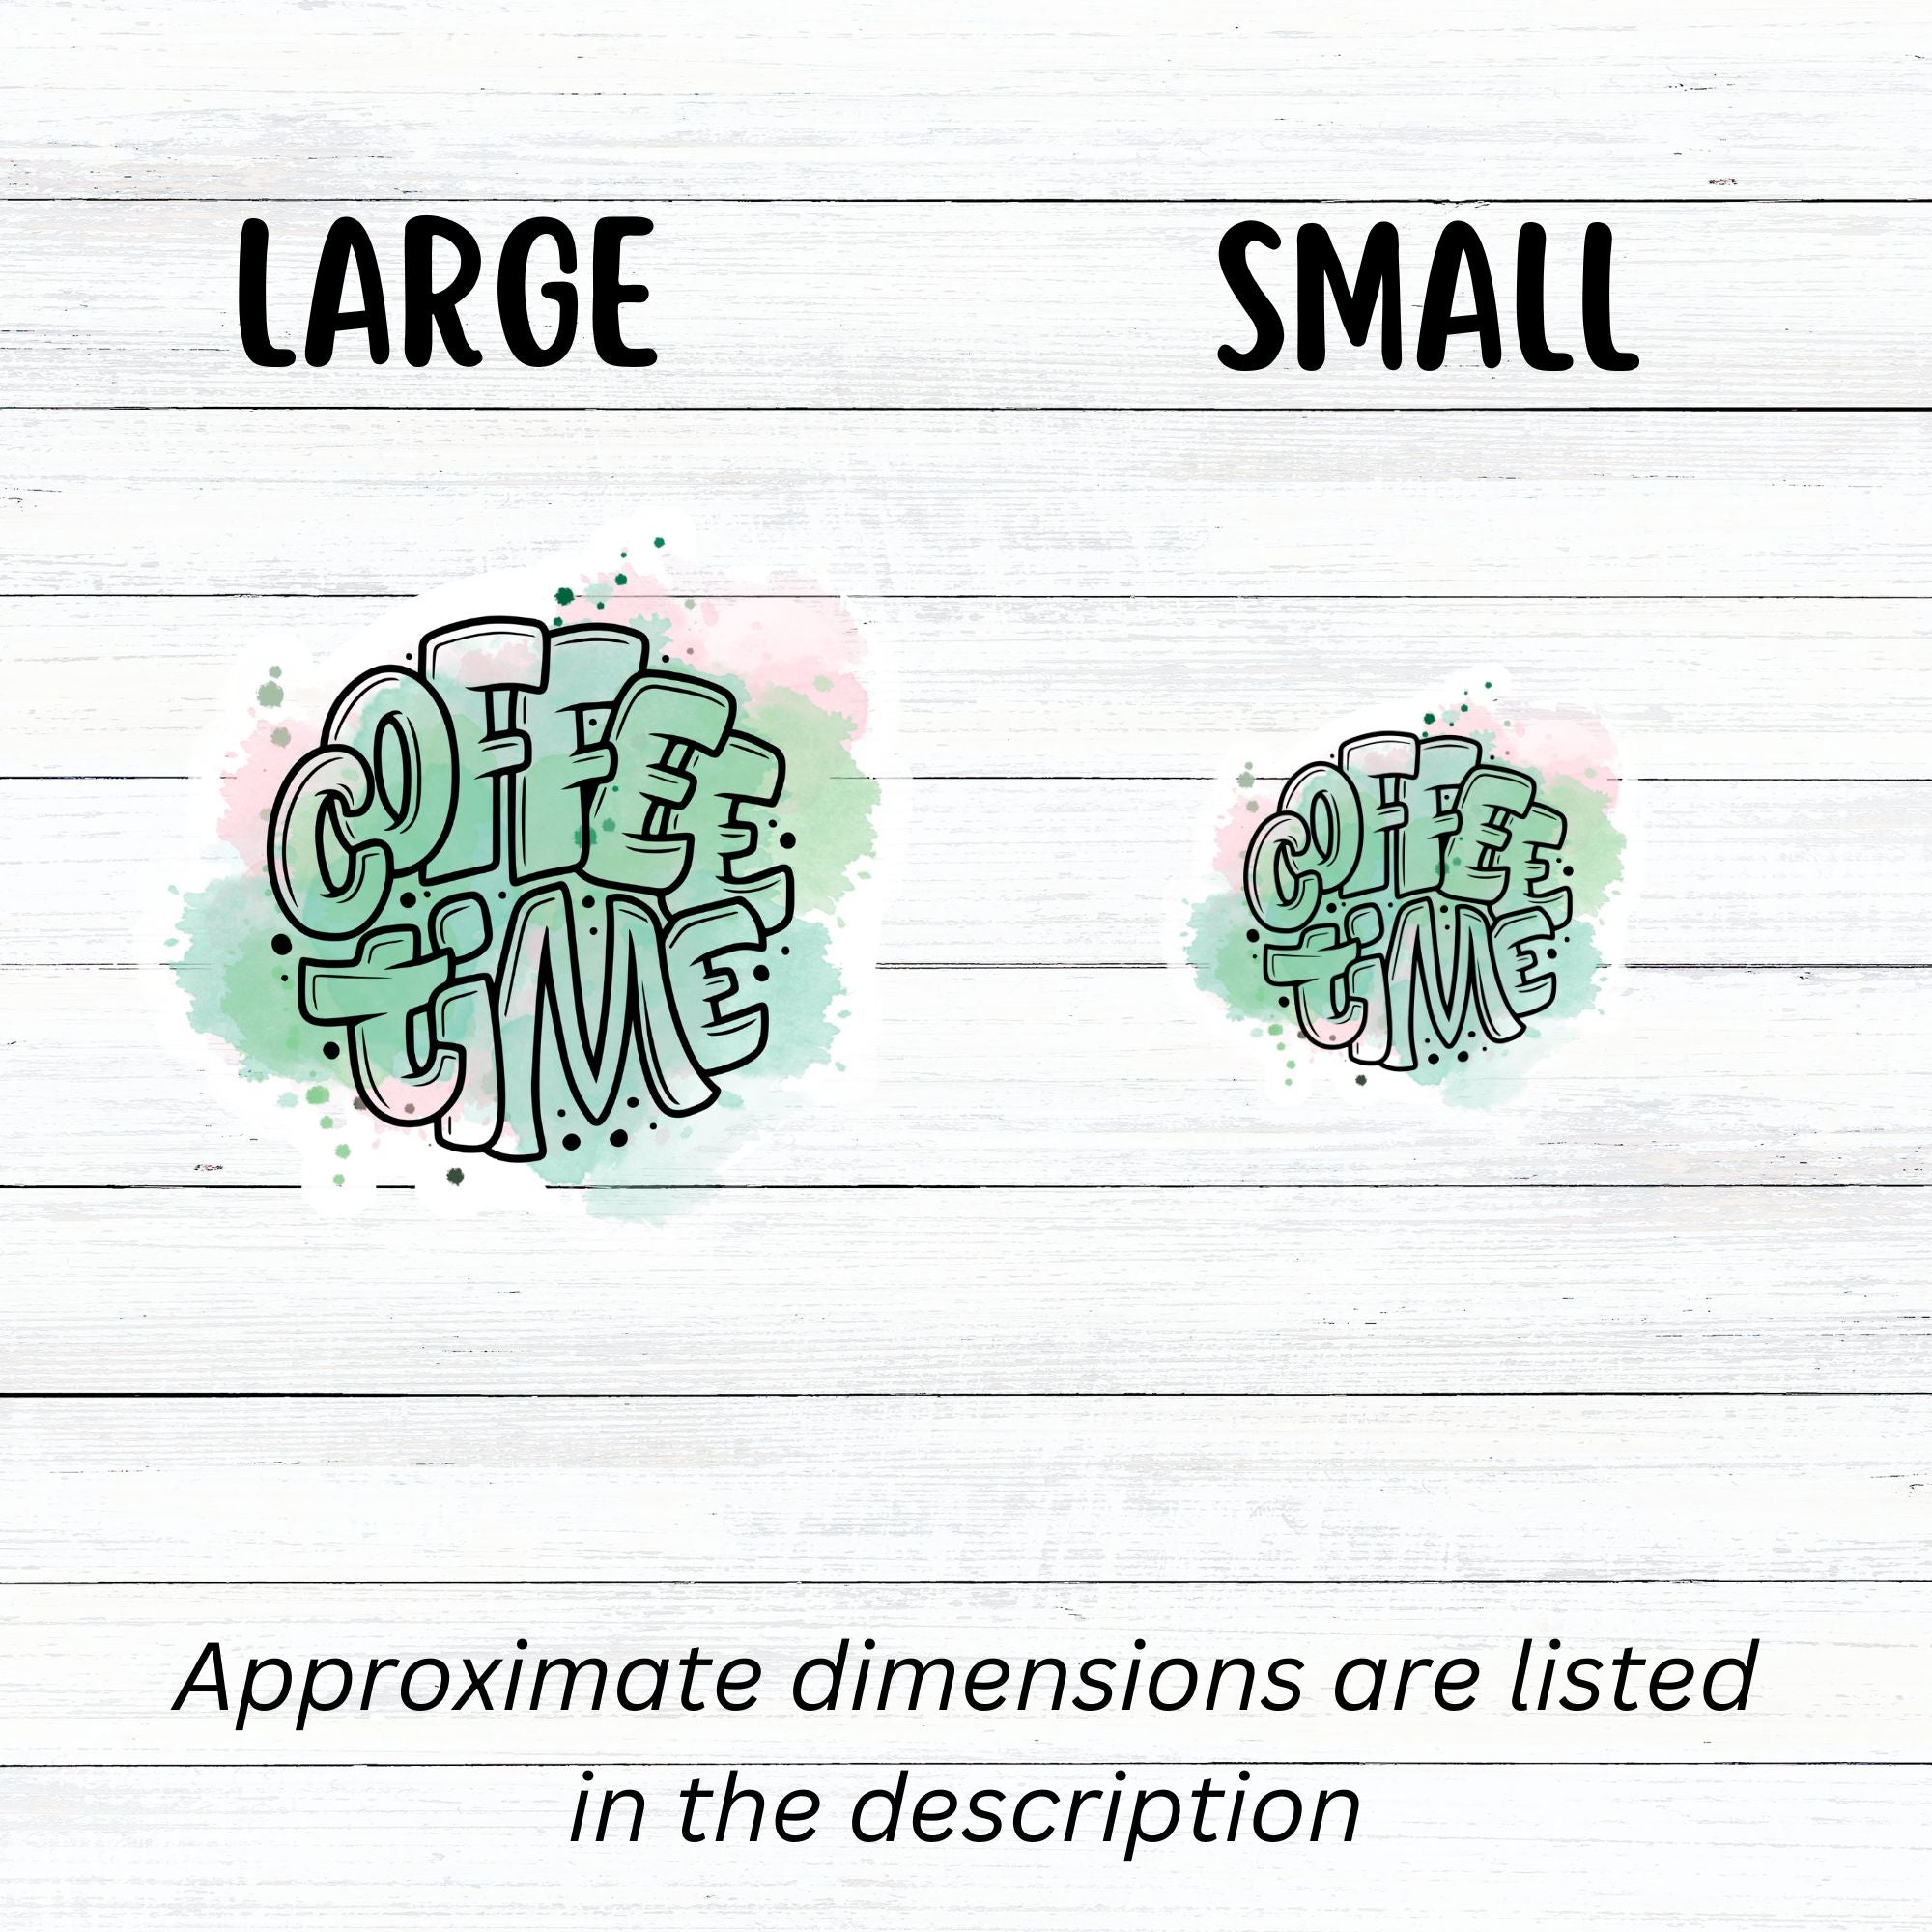 It's Coffee Time! This individual die-cut sticker features the words Coffee Time over a pastel green and pink background. This coffee sticker is great for all coffee lovers! This image shows large and small Coffee Time stickers next to each other.